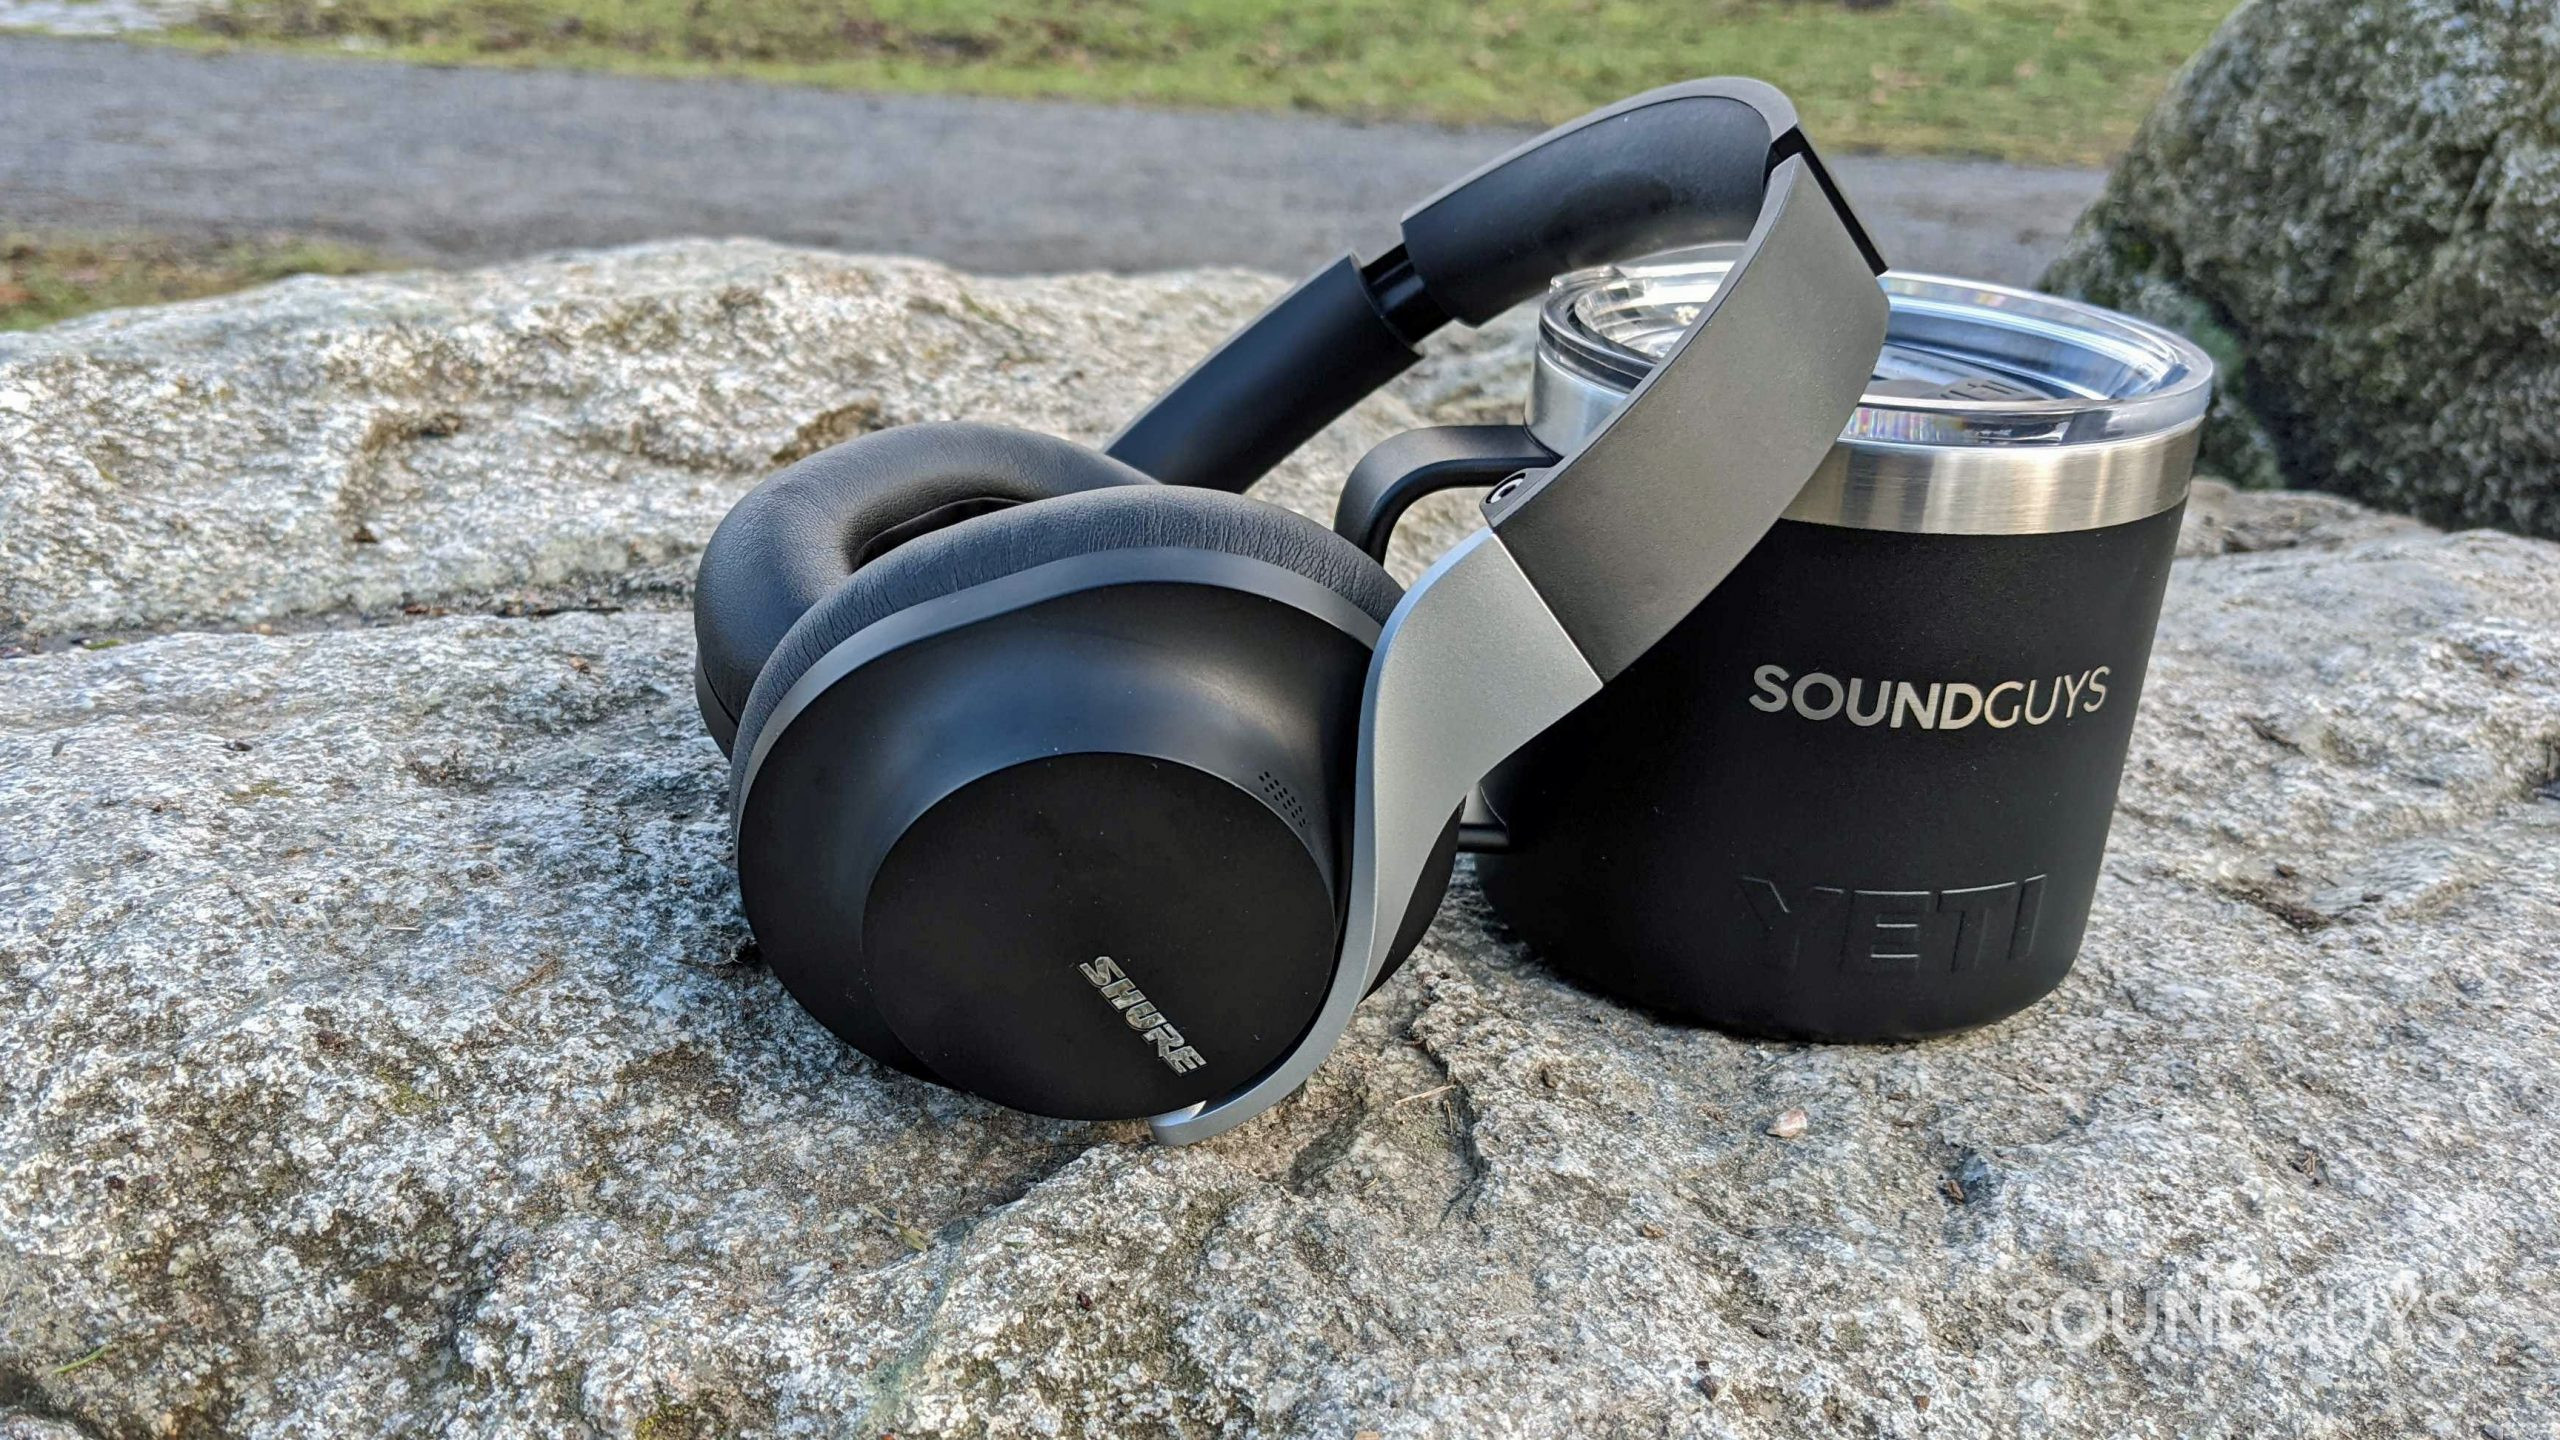 The Shure AONIC 40 sits on a rock outside, leaning on a SoundGuys branded YETI travel mug.